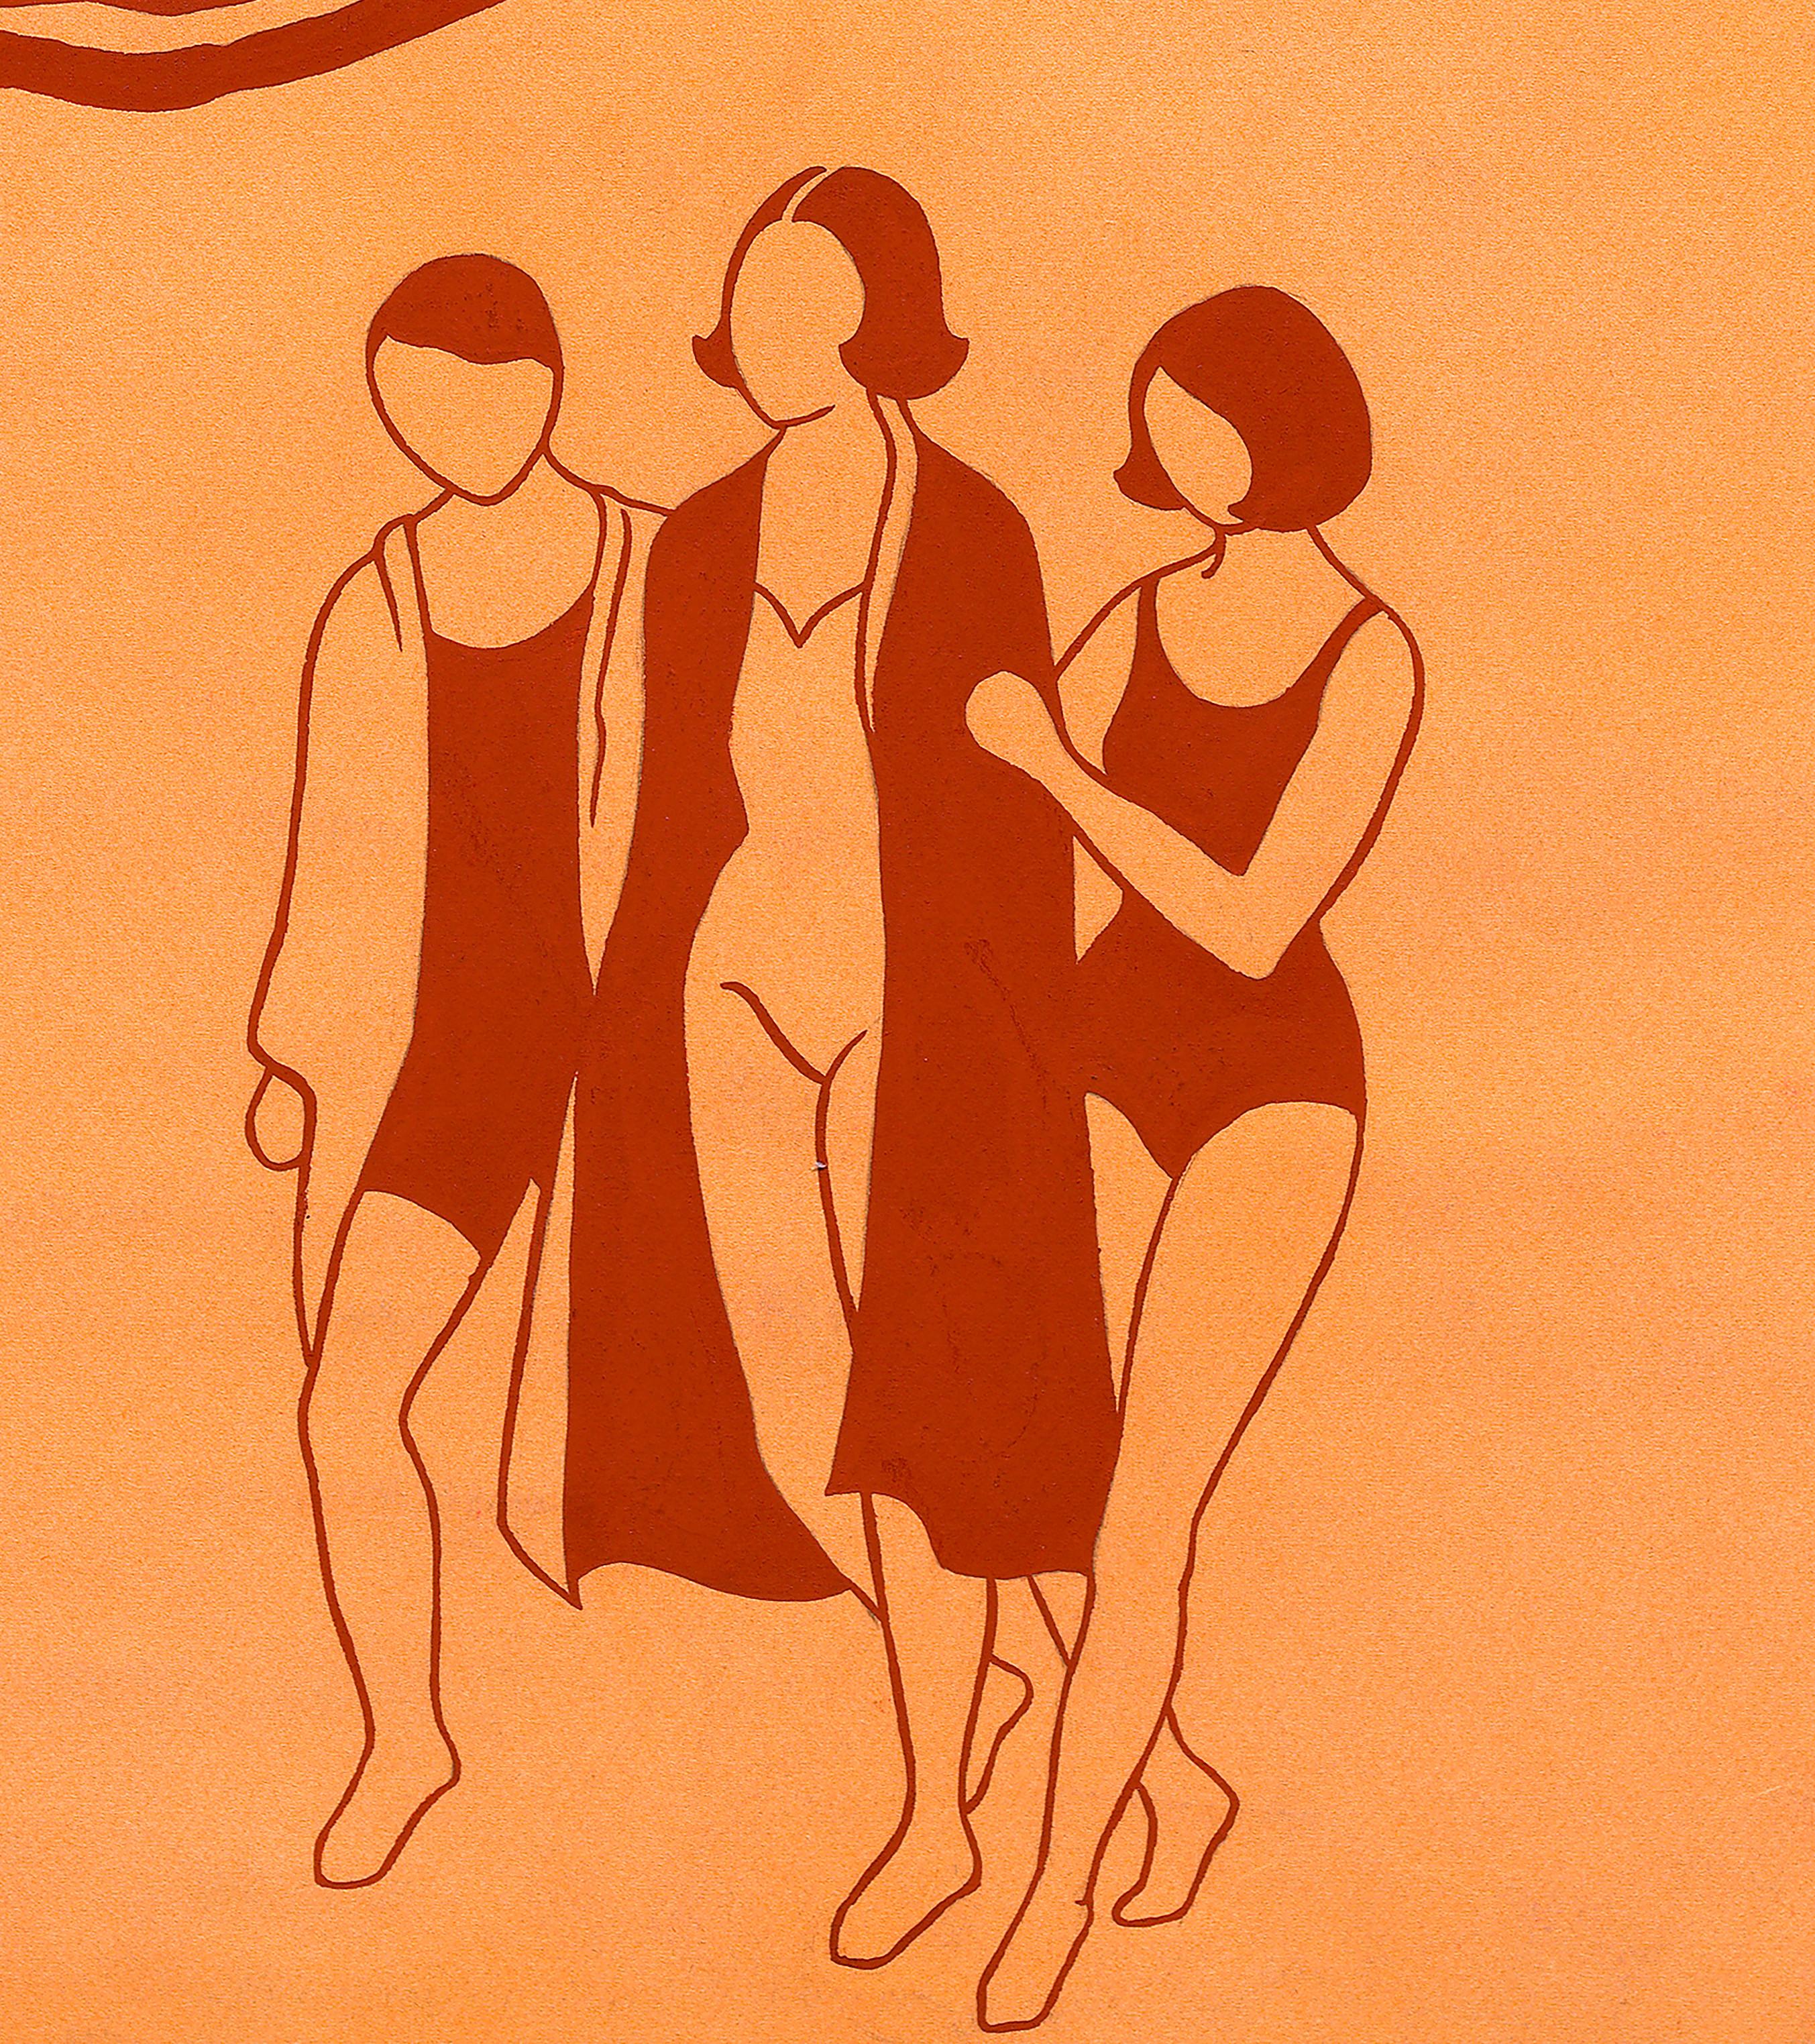 Three girls walking on the beach shore, Art Deco females. Sealed on the back with design studio name and number 446

We offer a small number of these original illustration designs by this design studio based in Alcoy (Spain), which could pair well